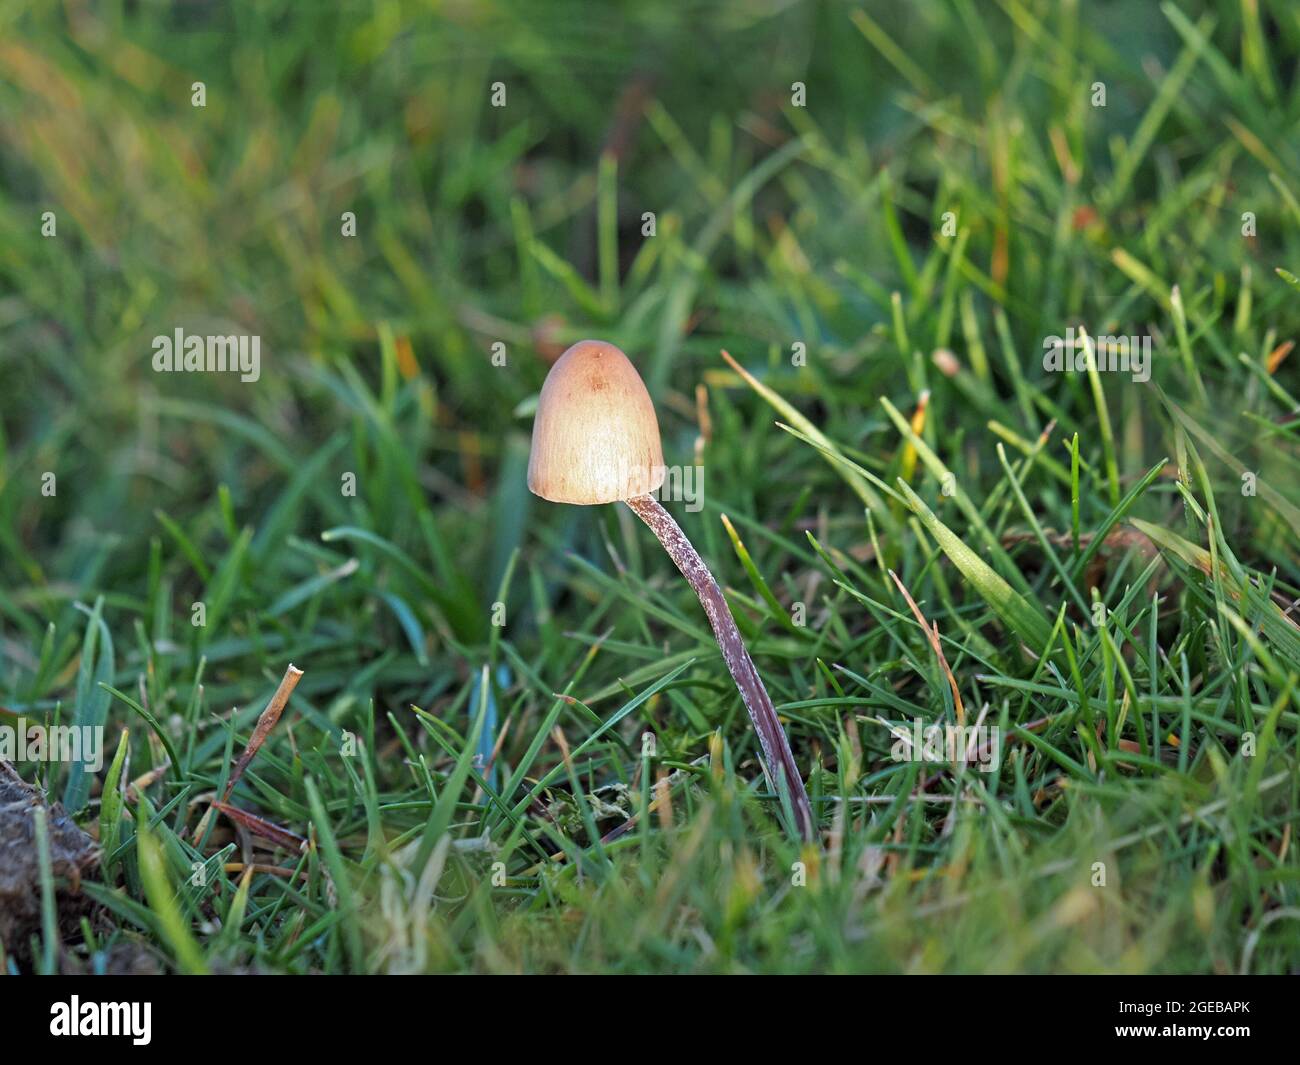 long thin dark stem & conical cream cap of small toadstool fungus growing wild on unimproved Waxcap Grassland in Cumbria, England,UK Stock Photo